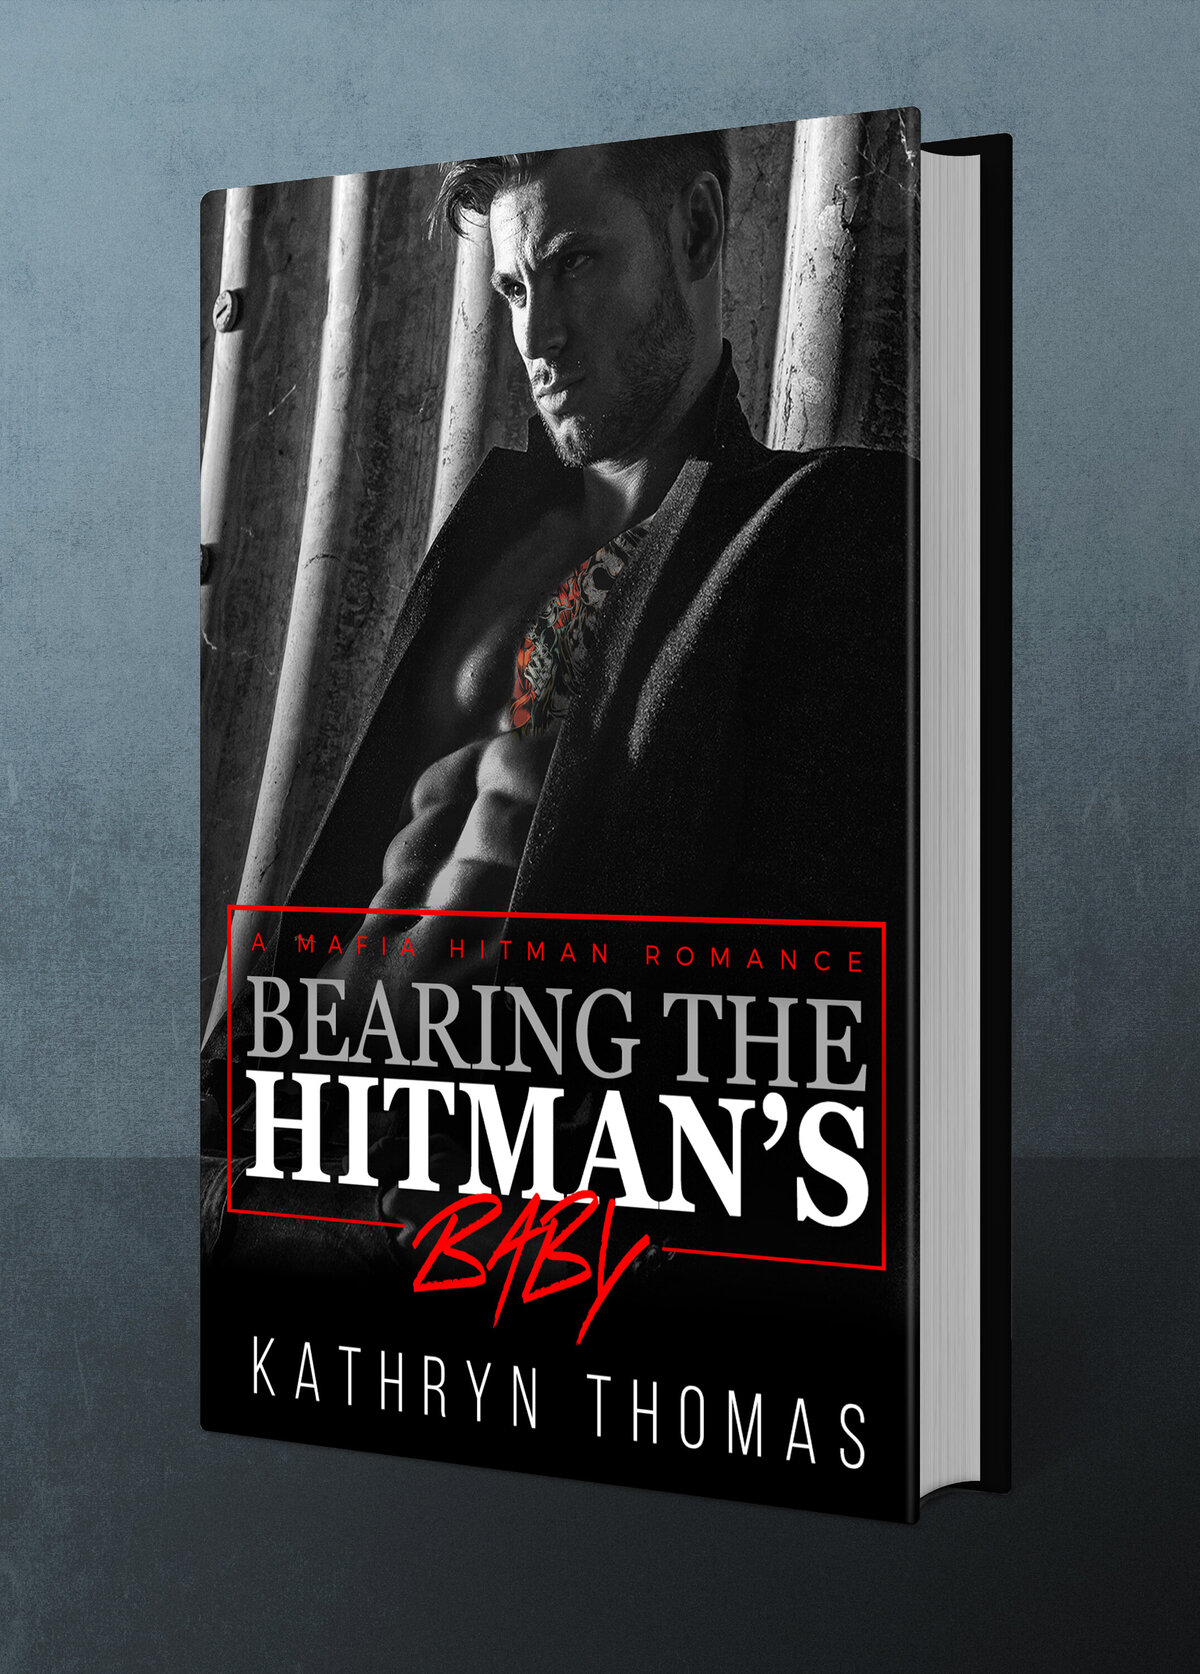 Bearing the Hitman's Baby by Kathryn Thomas